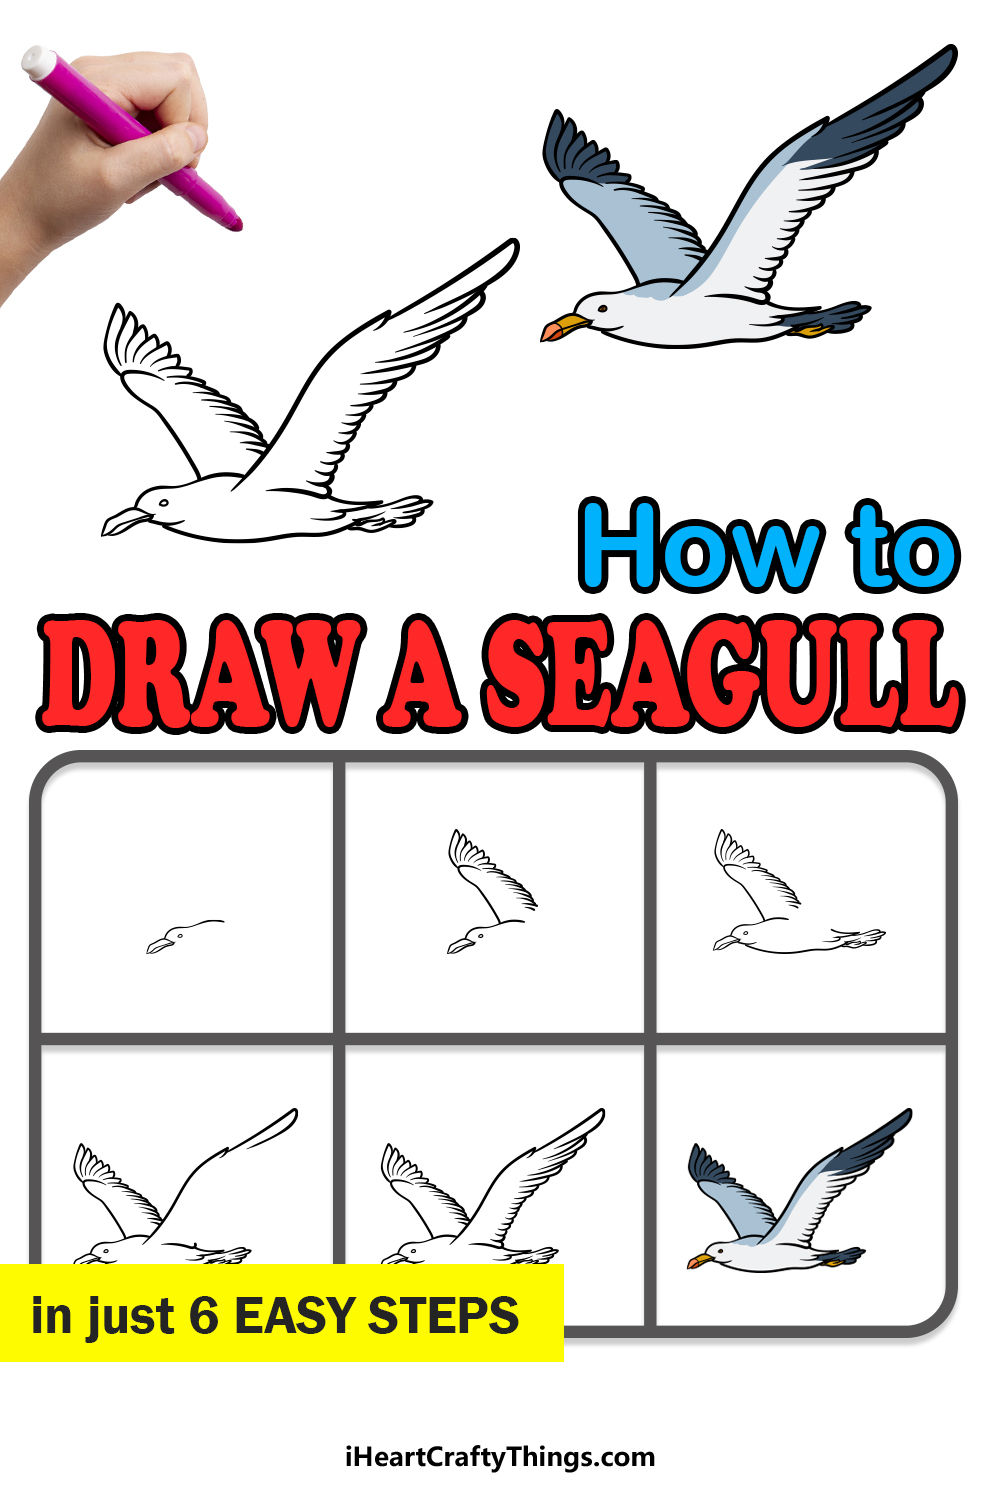 how to draw a Seagull in 6 easy steps